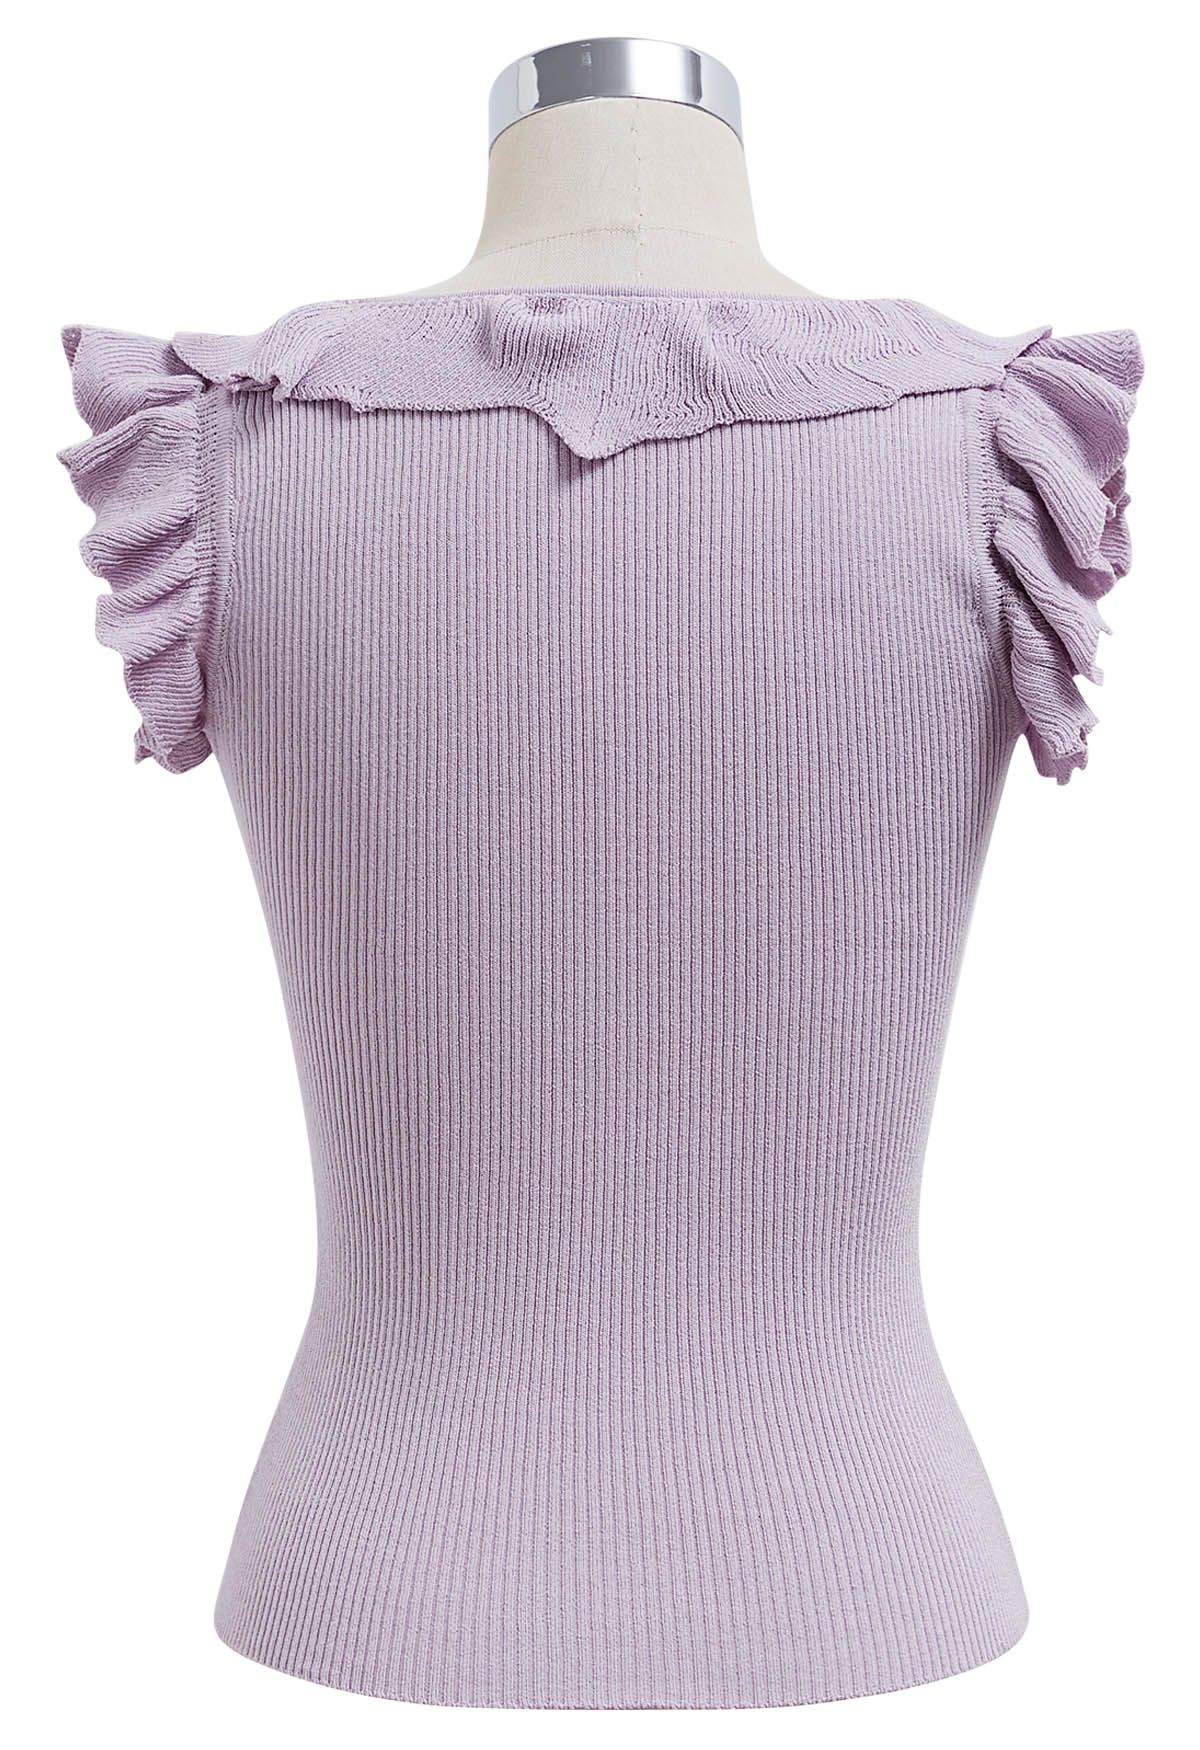 Ethereal Ruffle Sleeveless Knit Top in Lilac